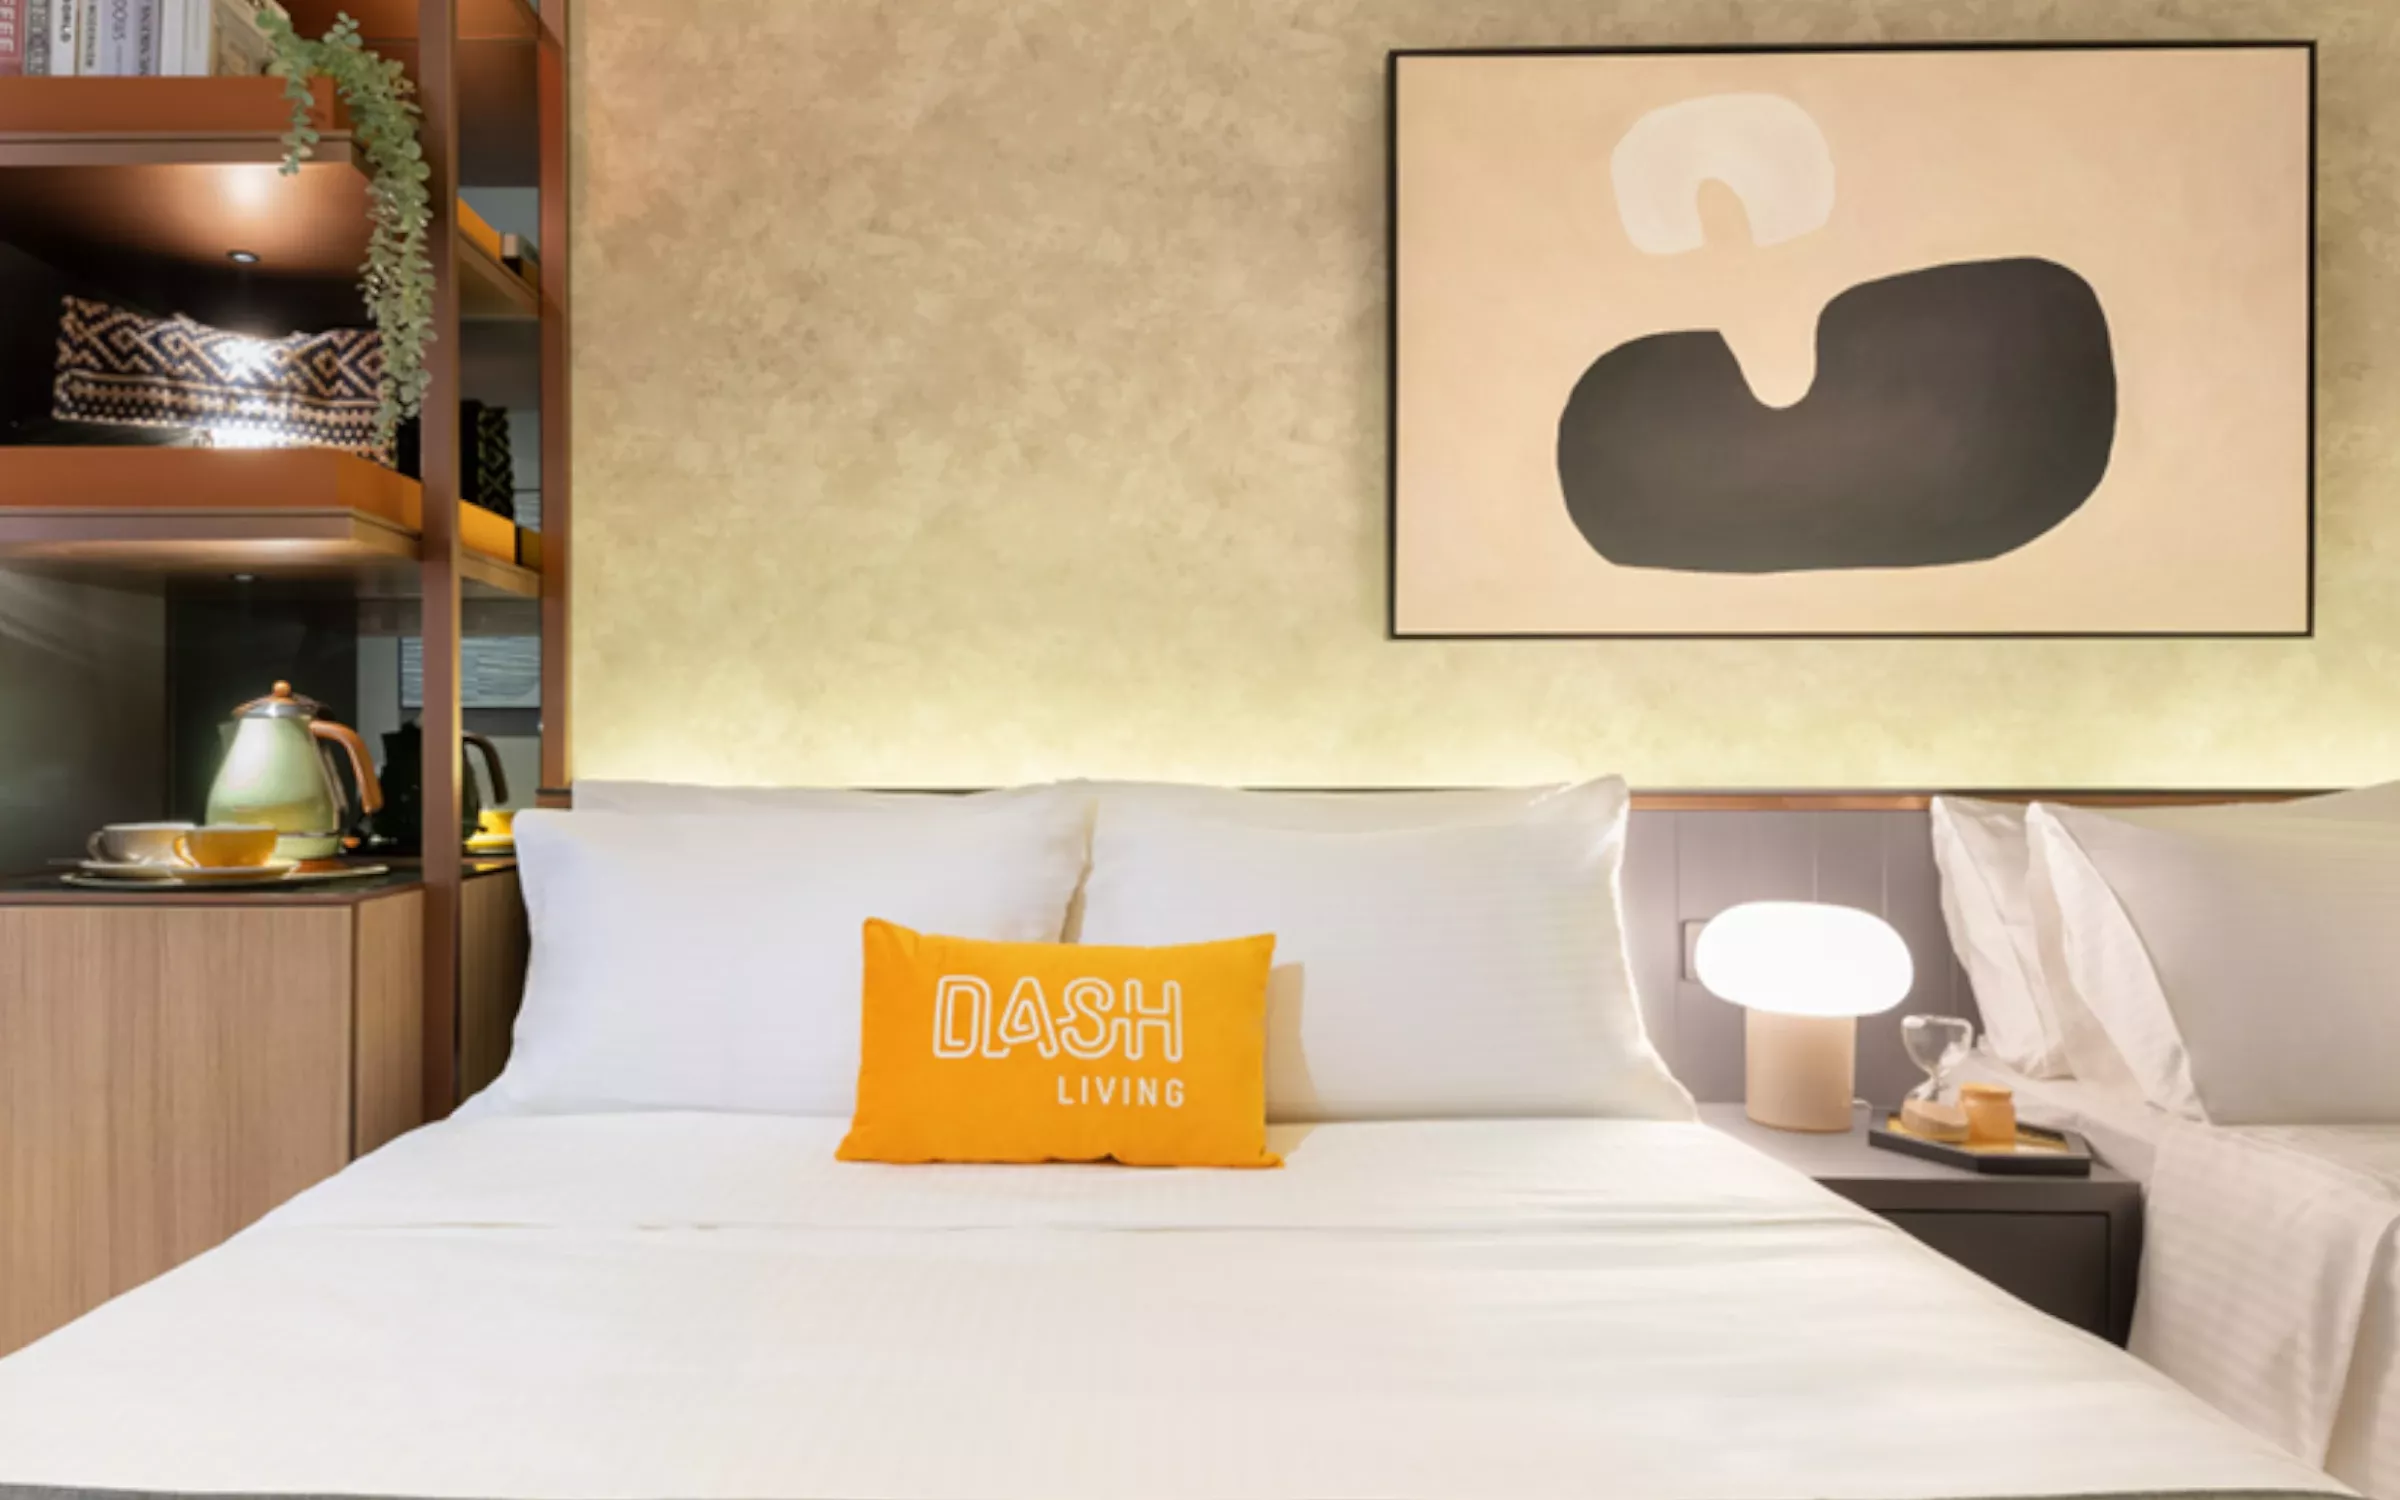 Can a Hong Kong hotel become an affordable housing haven?